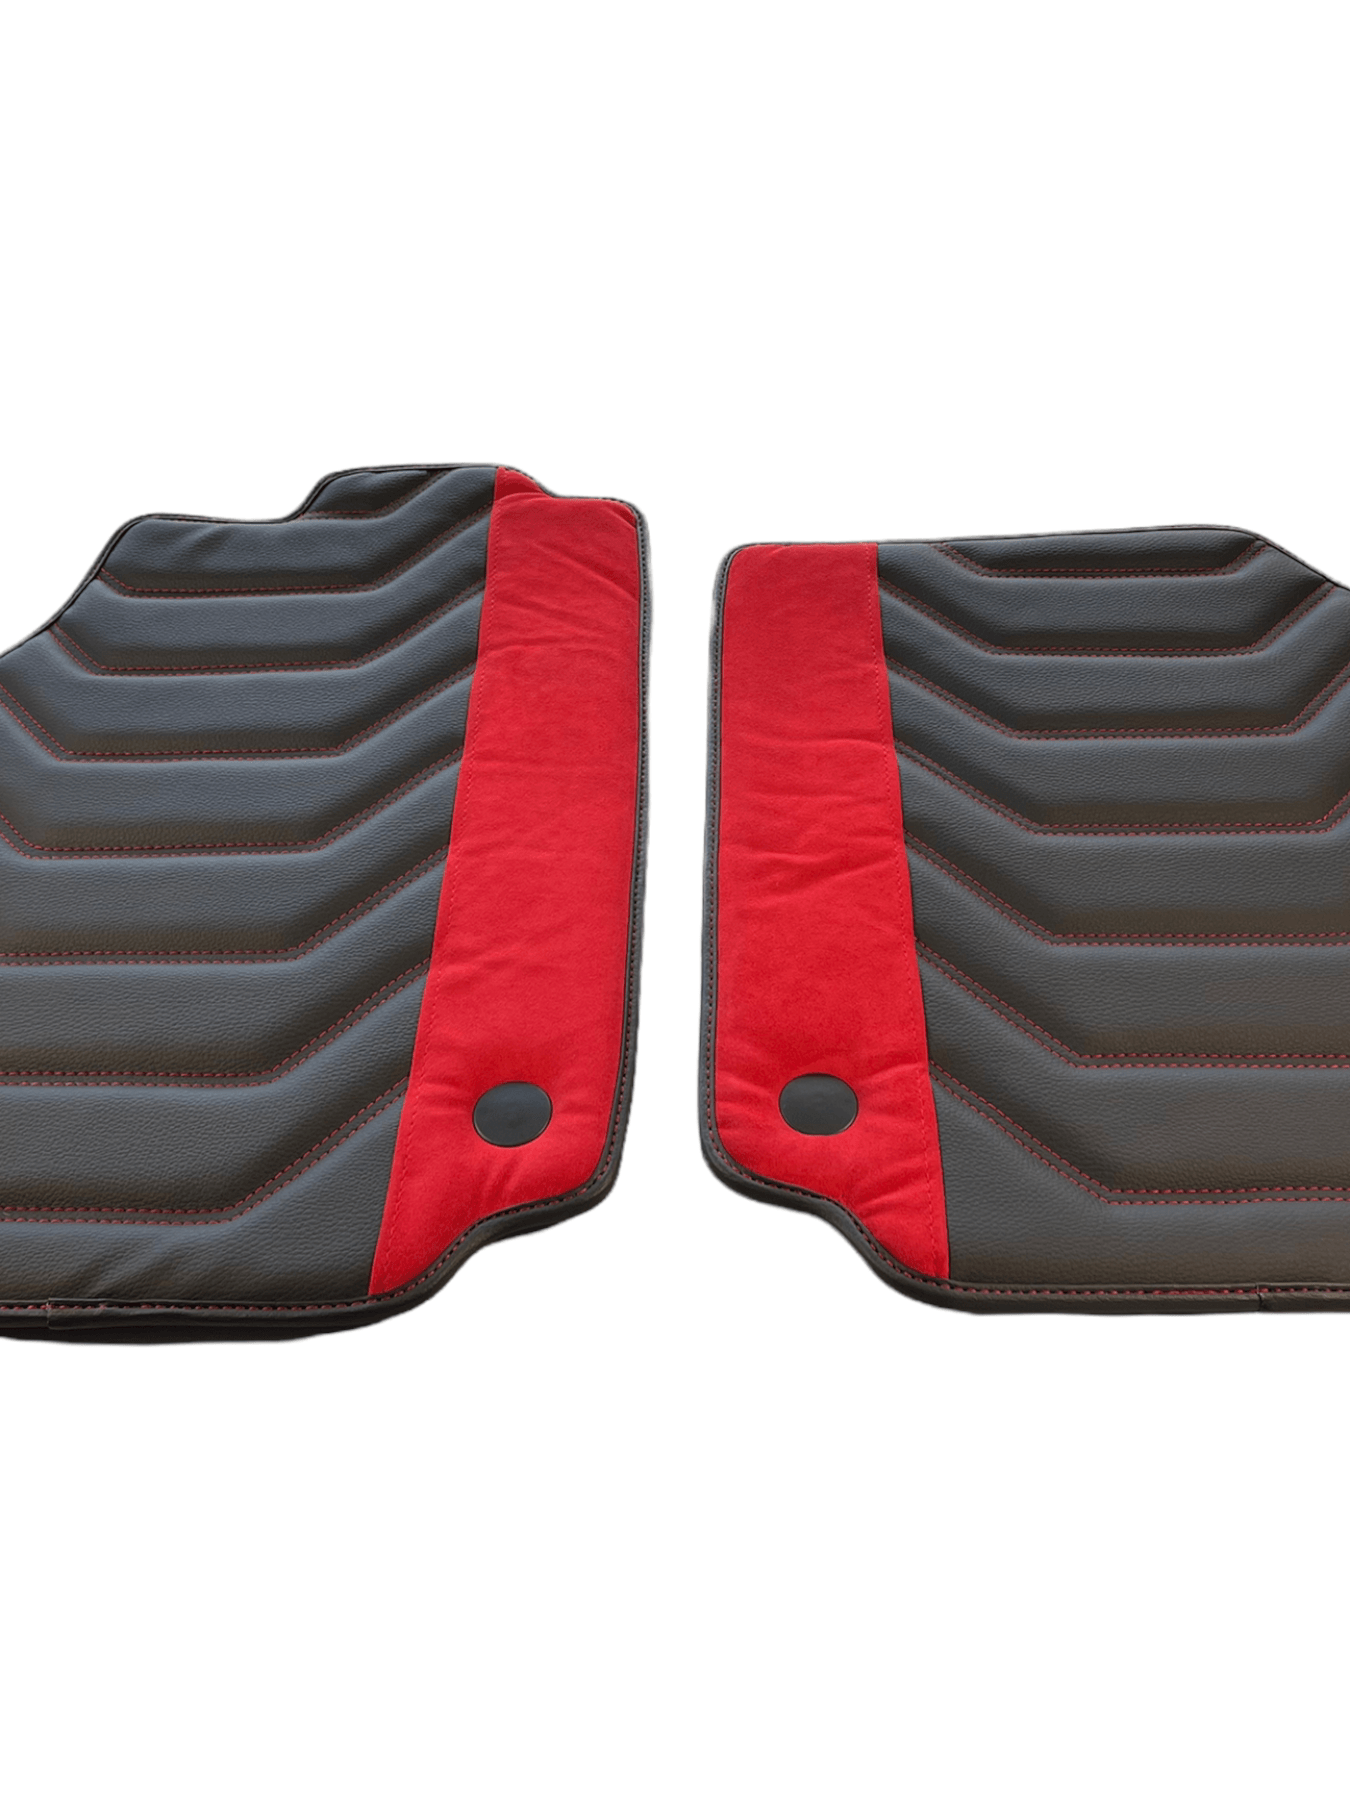 Floor Mats For Ferrari 458 Spider 2012-2015 Leather With Red Alcantara - AutoWin